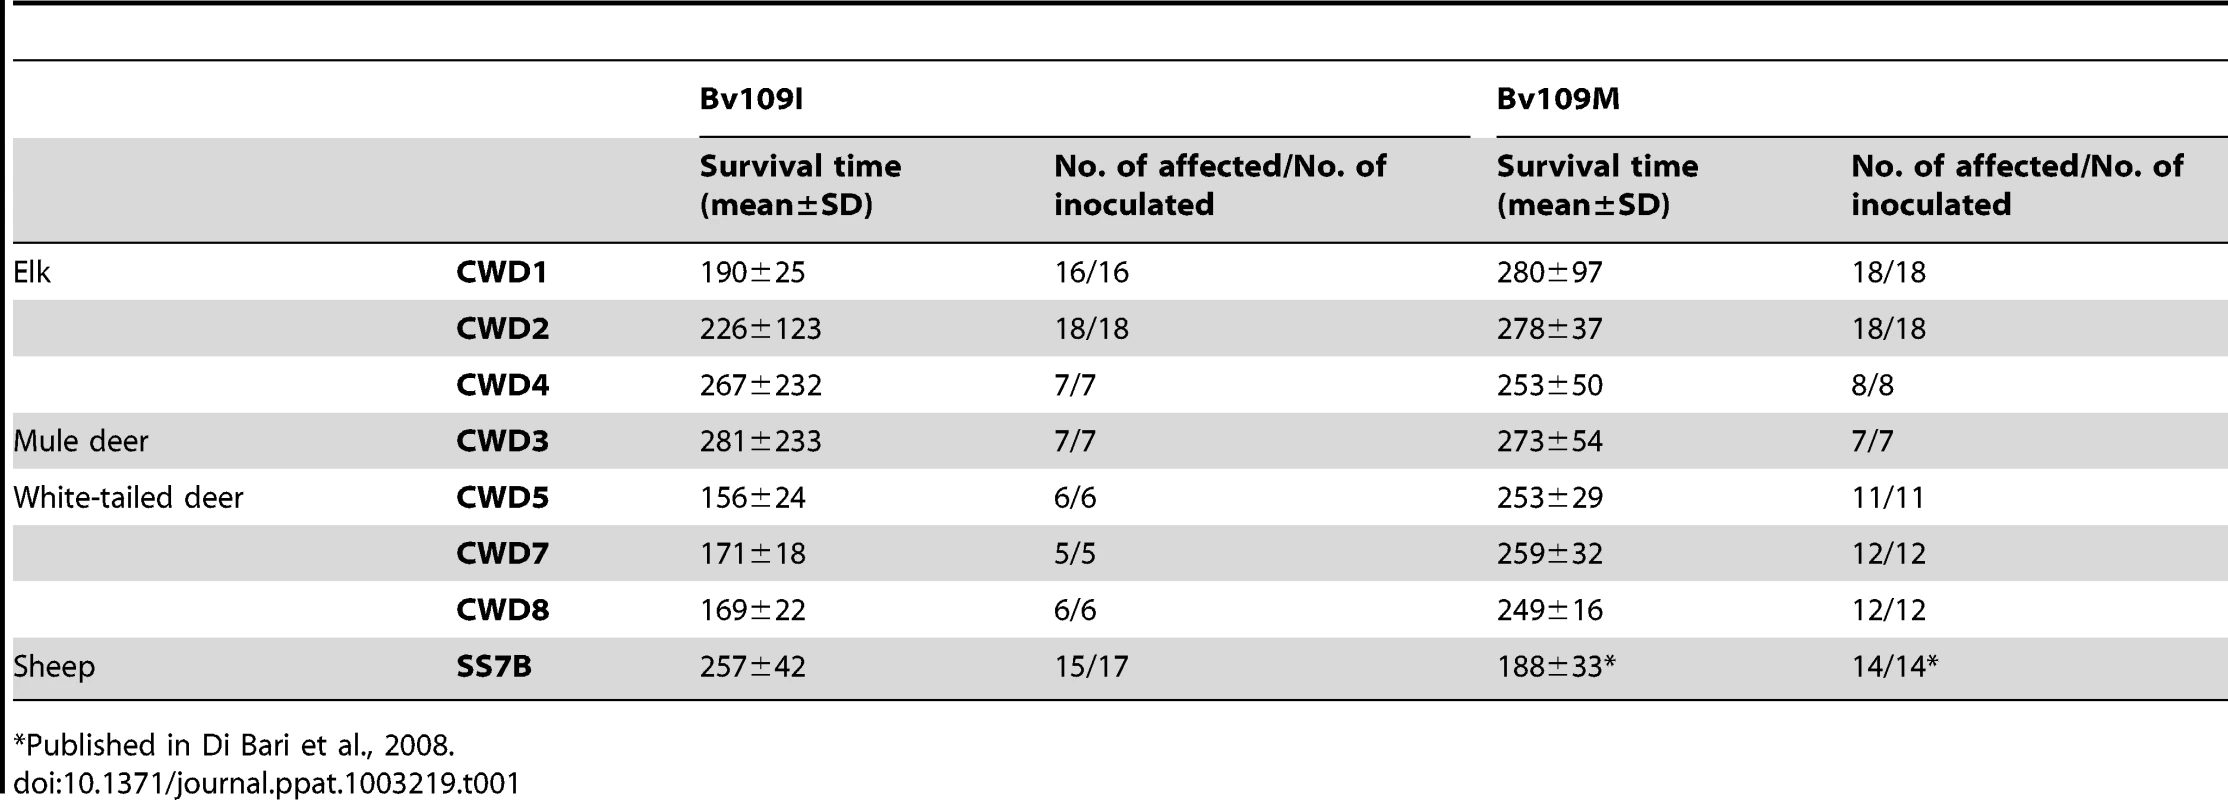 Survival times of Bv109I and Bv109M after primary transmission of CWD.